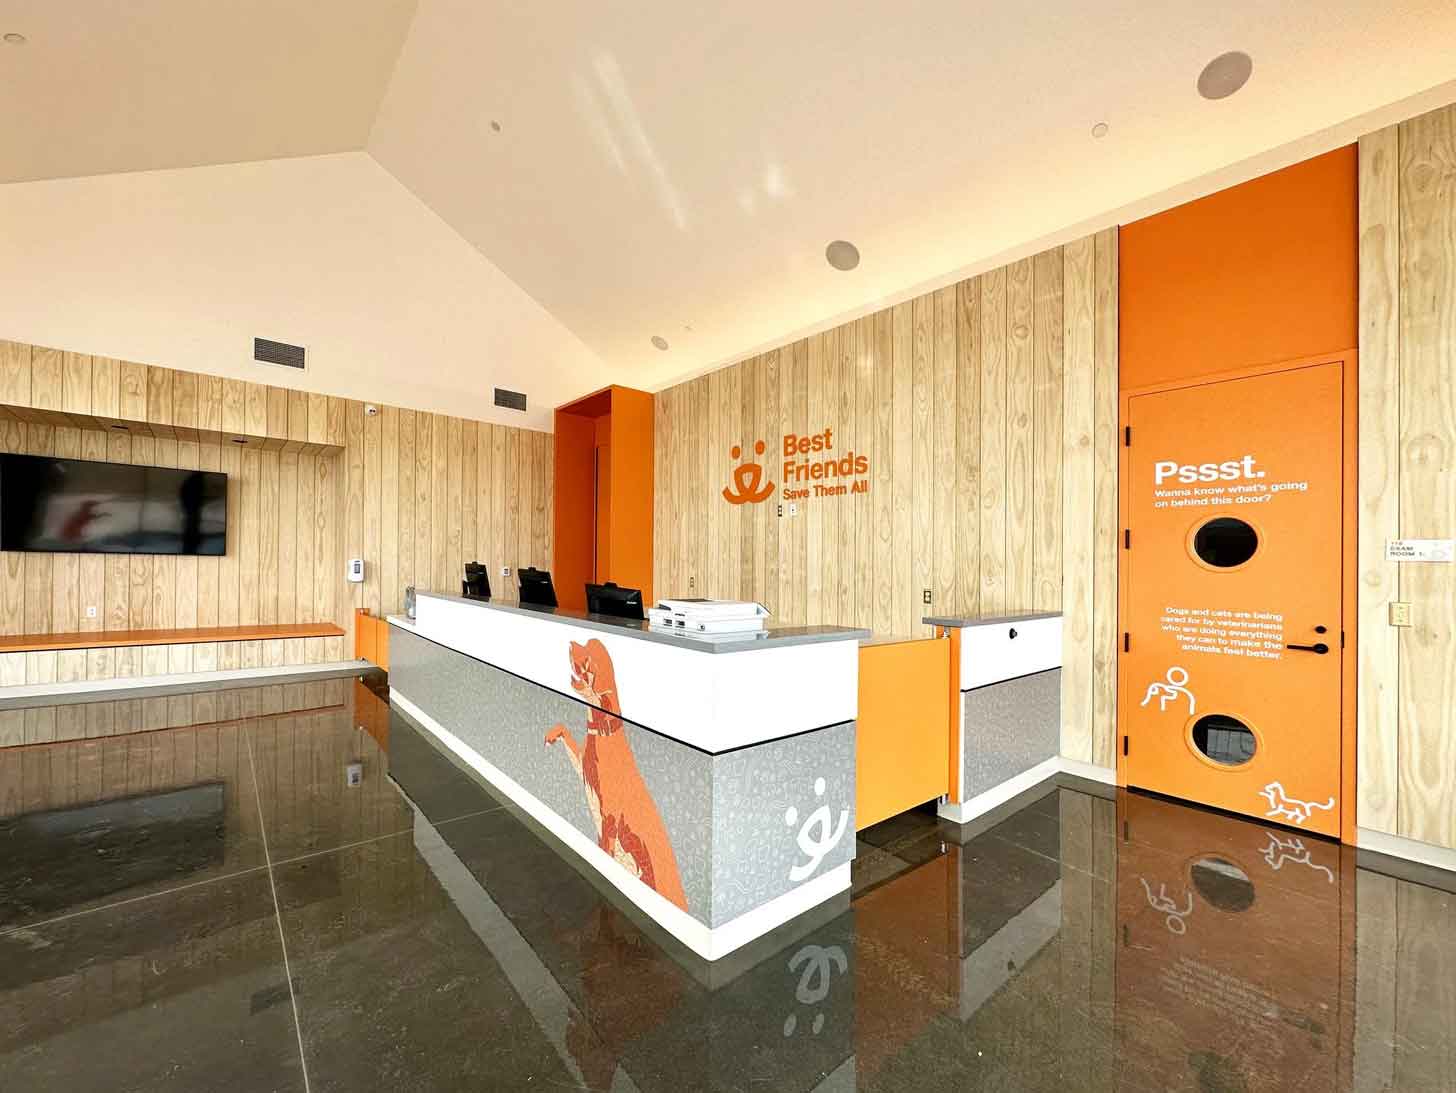 The front desk of Best Friends Pet Resource Center, featuring orange accents and a small window in the door for dogs to see out